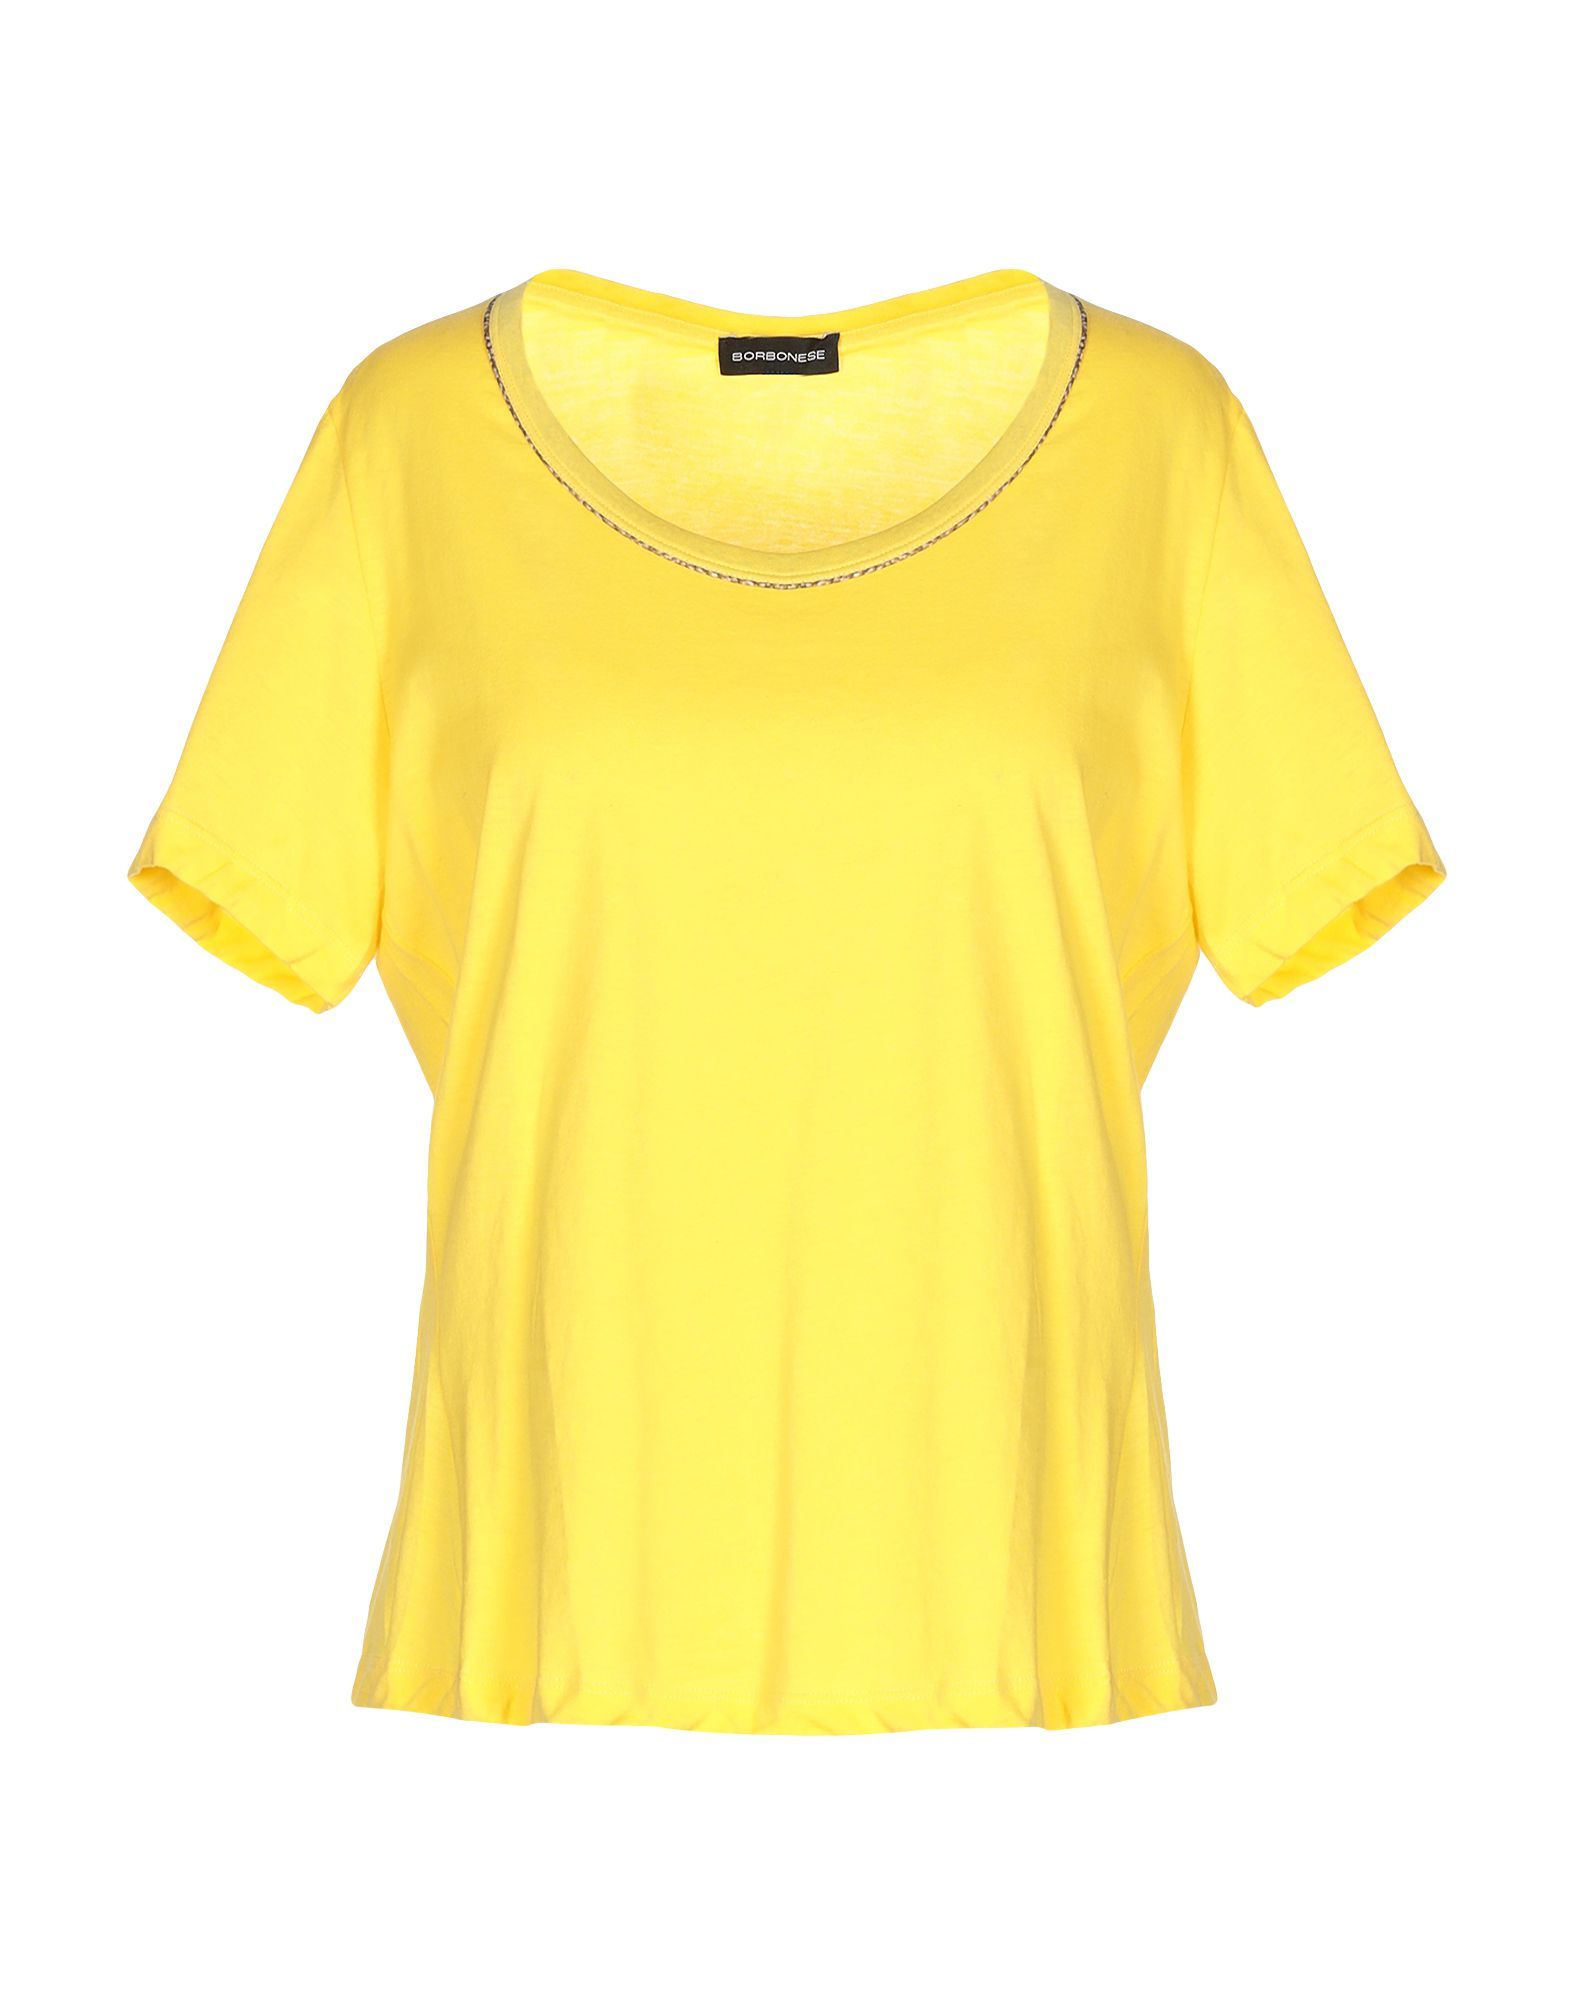 jersey, no appliqués, solid colour, round collar, short sleeves